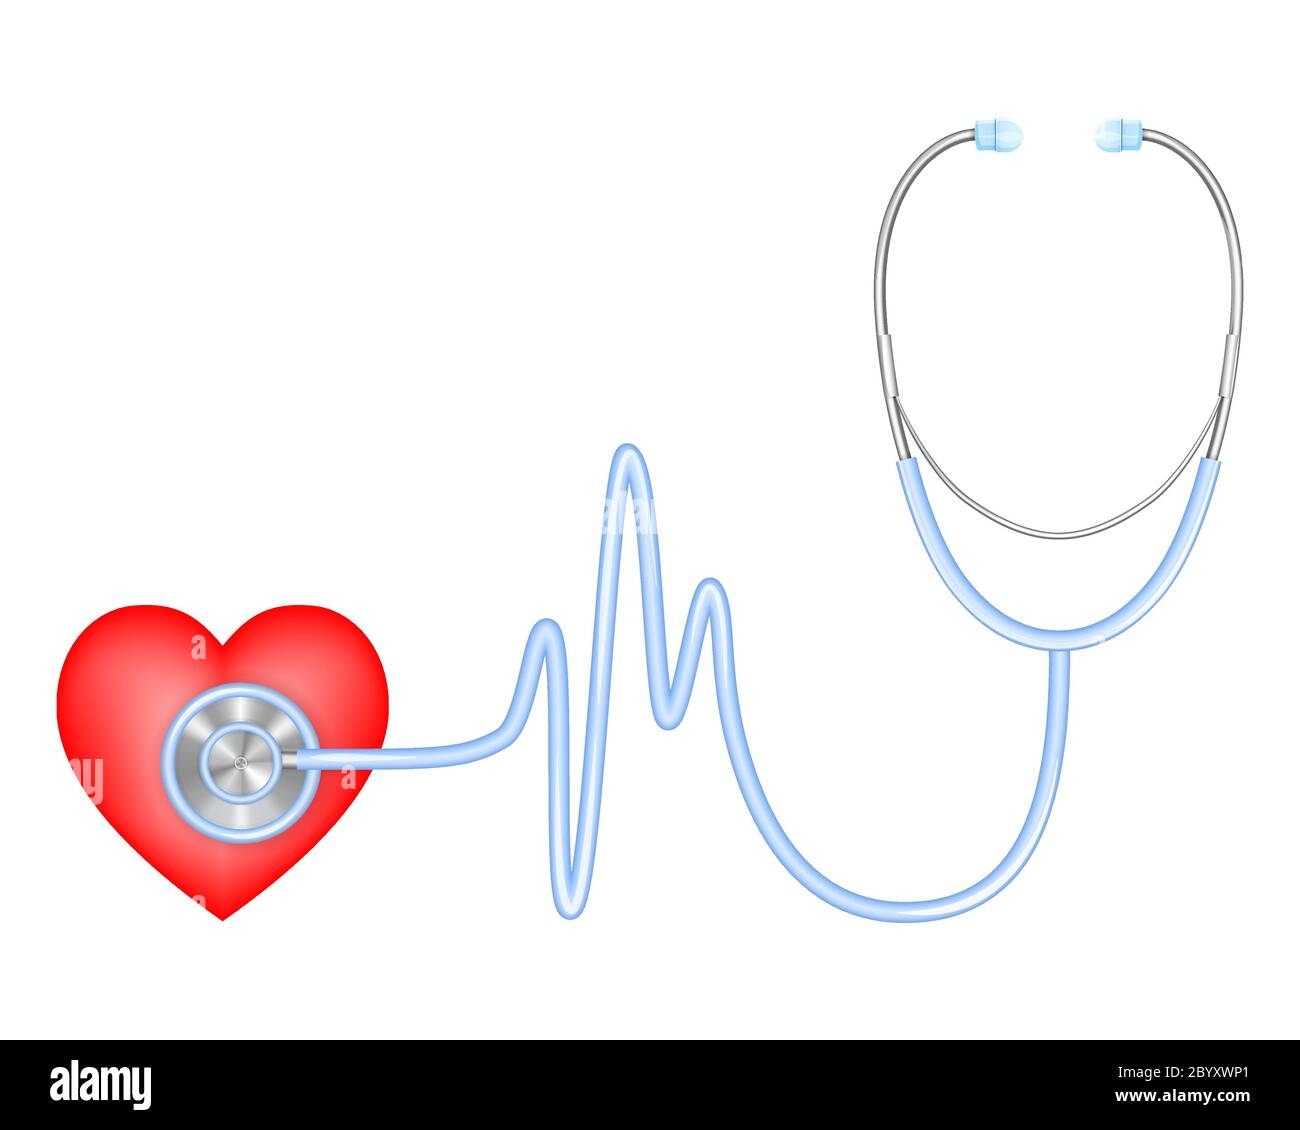 Stethoscope medical equipment. Cardiology diagnostic concept. Stethoscope with heartbeat and heart, heart disease diagnosis. Realistic vector illustra Stock Vector